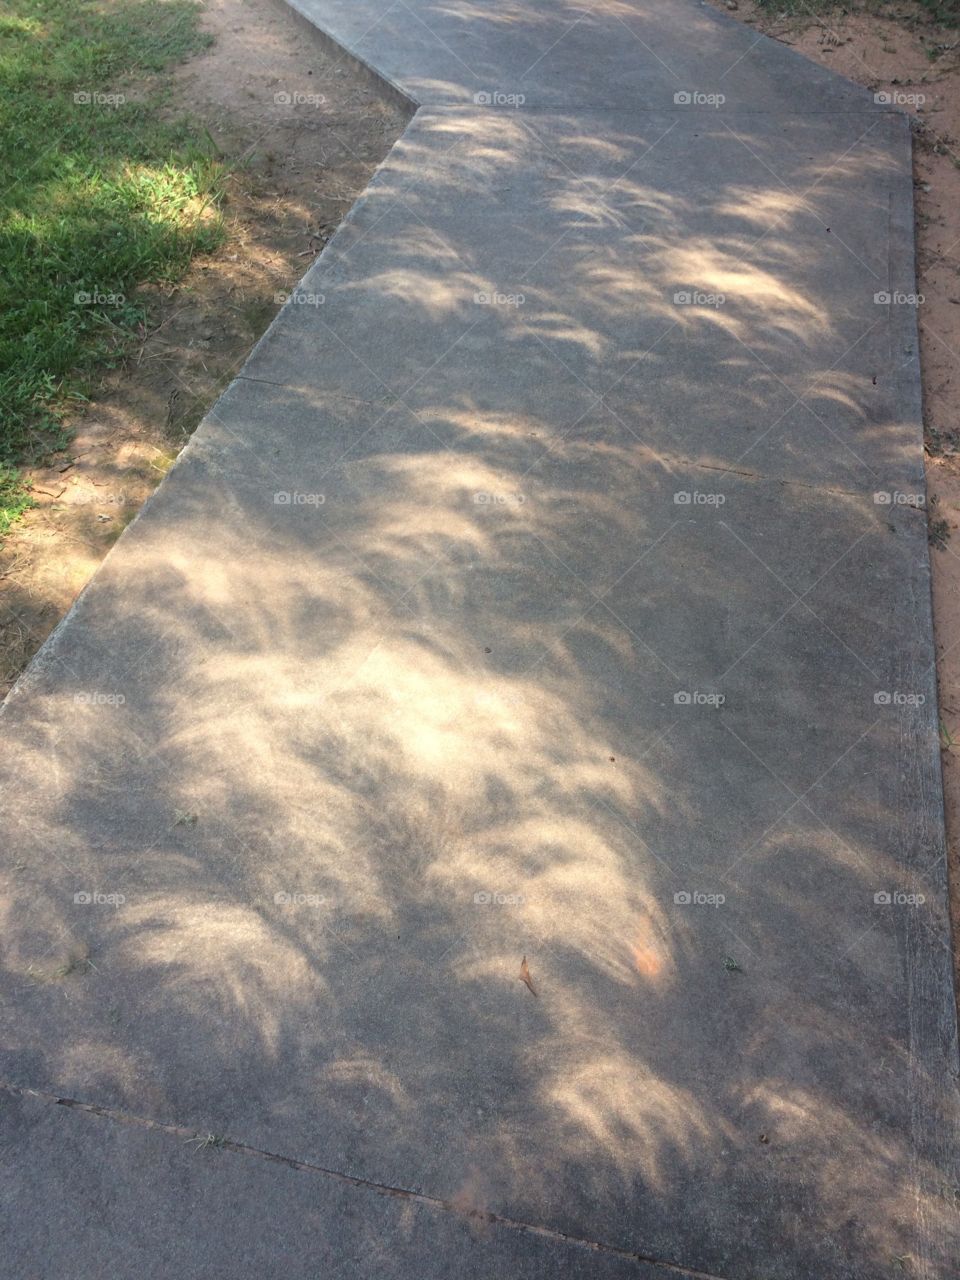 Shadows made by solar eclipse 